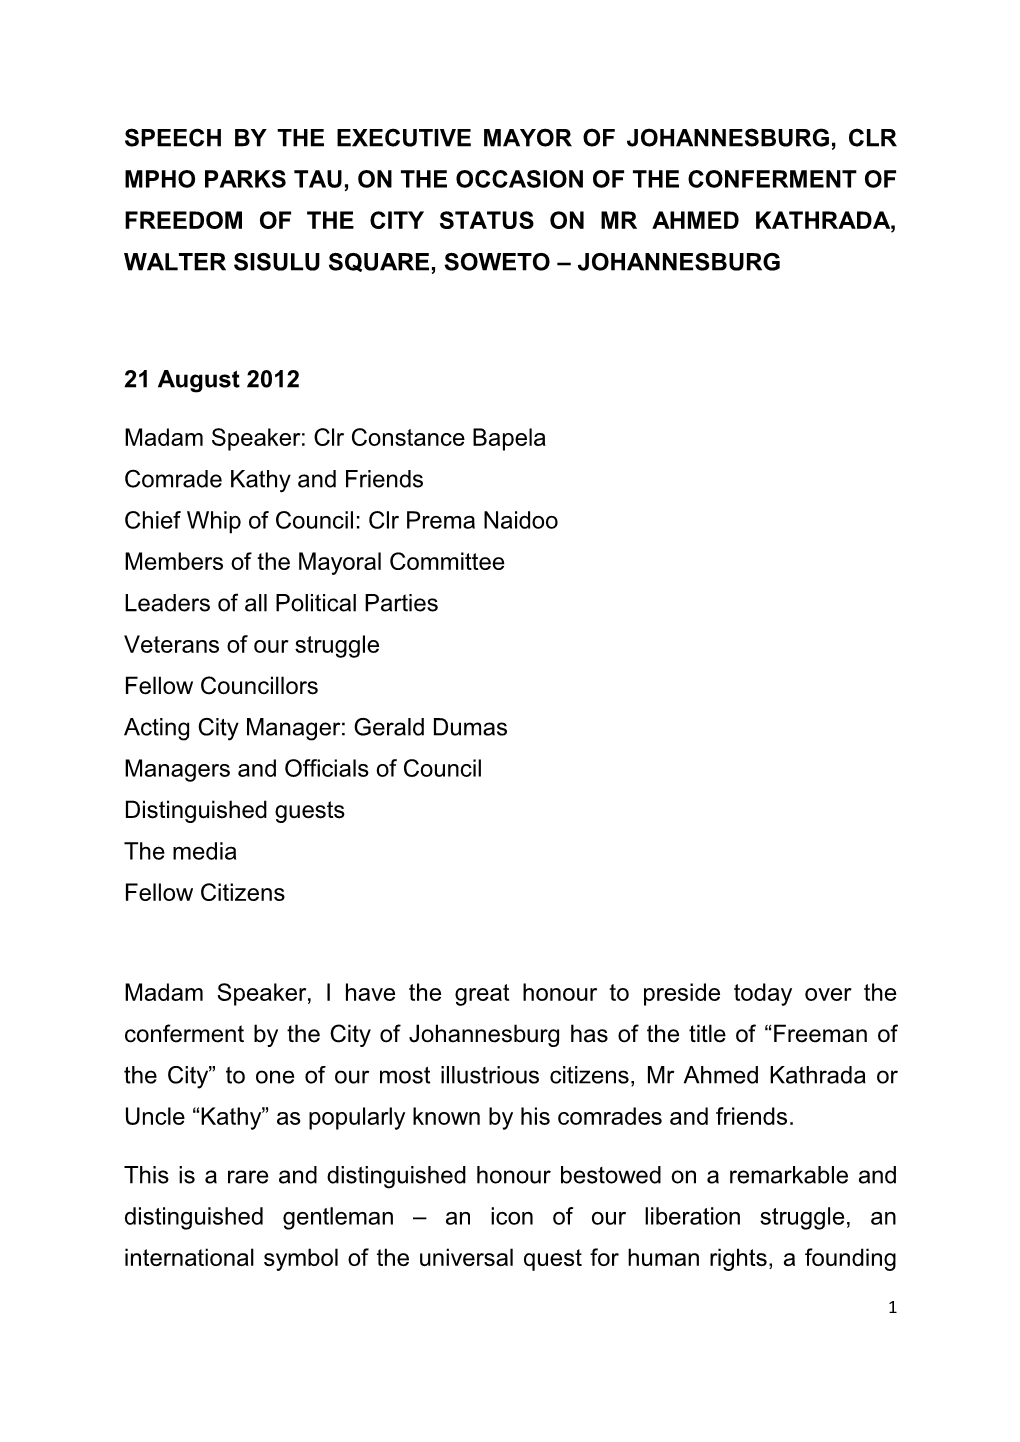 The Conferment of Freedom of the City Status on Mr Ahmed Kathrada, Walter Sisulu Square, Soweto – Johannesburg